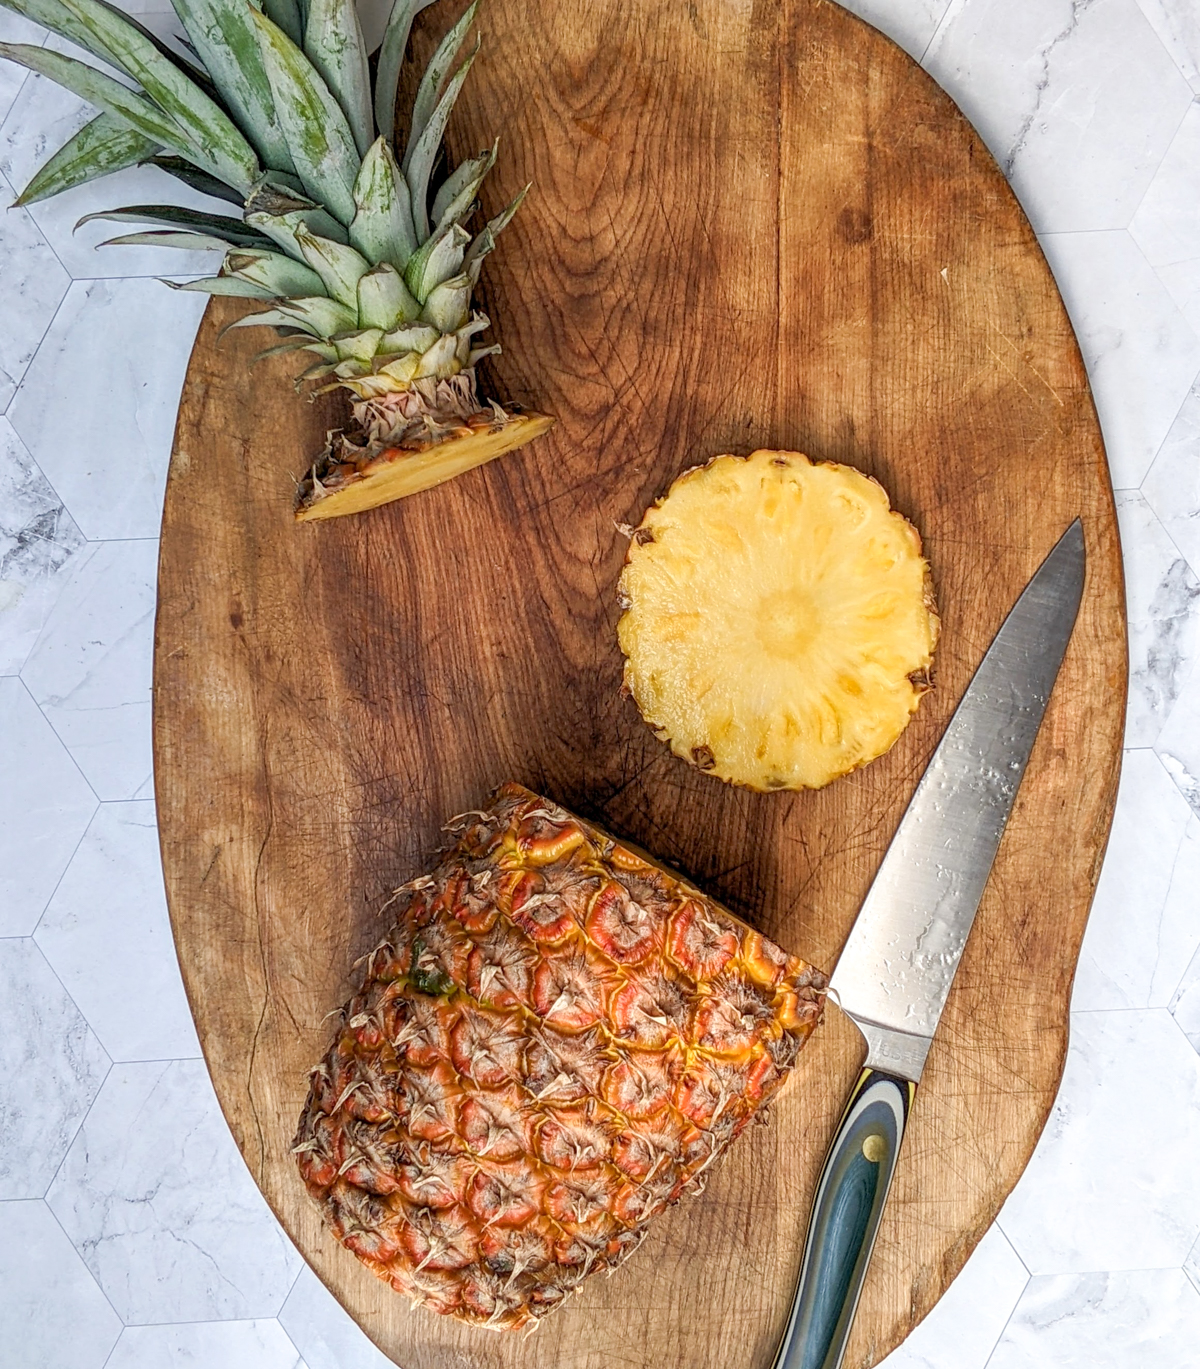 Cutting the top and bottom off of a fresh pineapple.